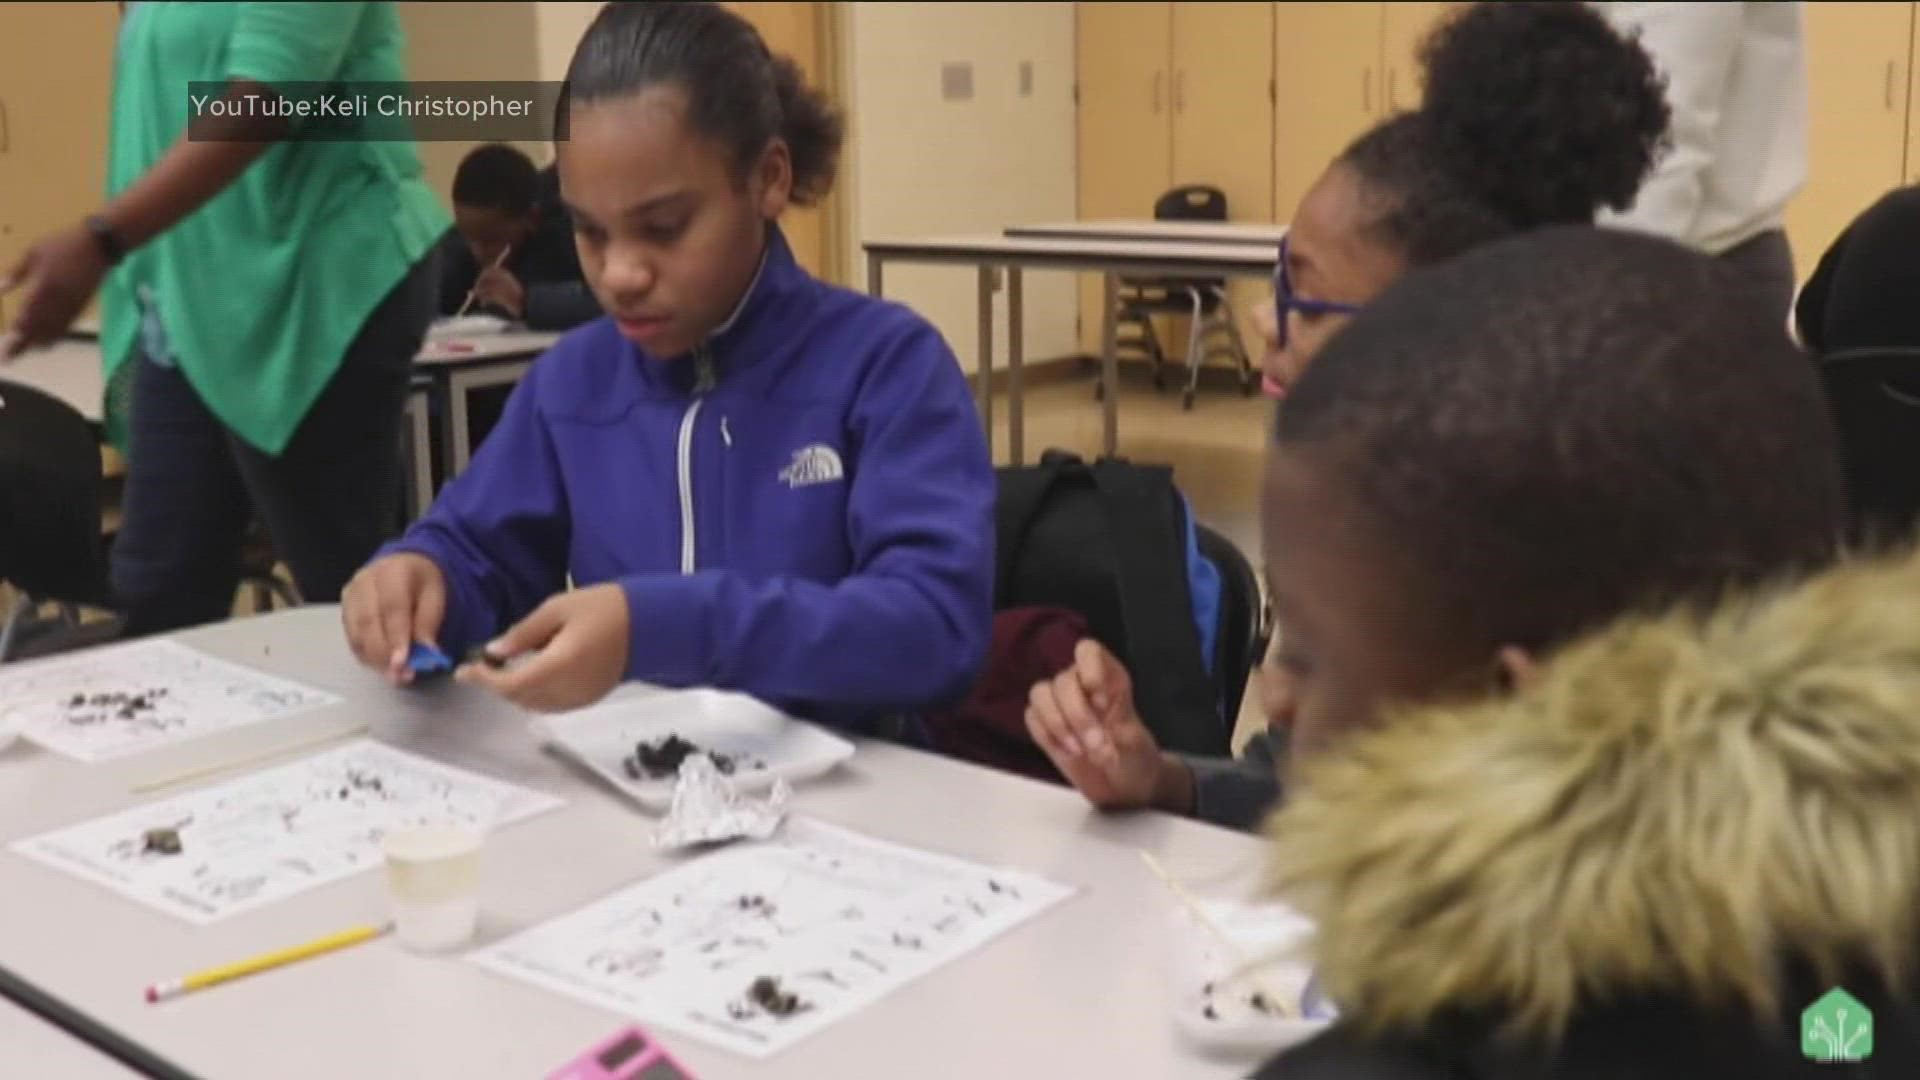 Nonprofit STEM Greenhouse partners with schools to provide quality education.